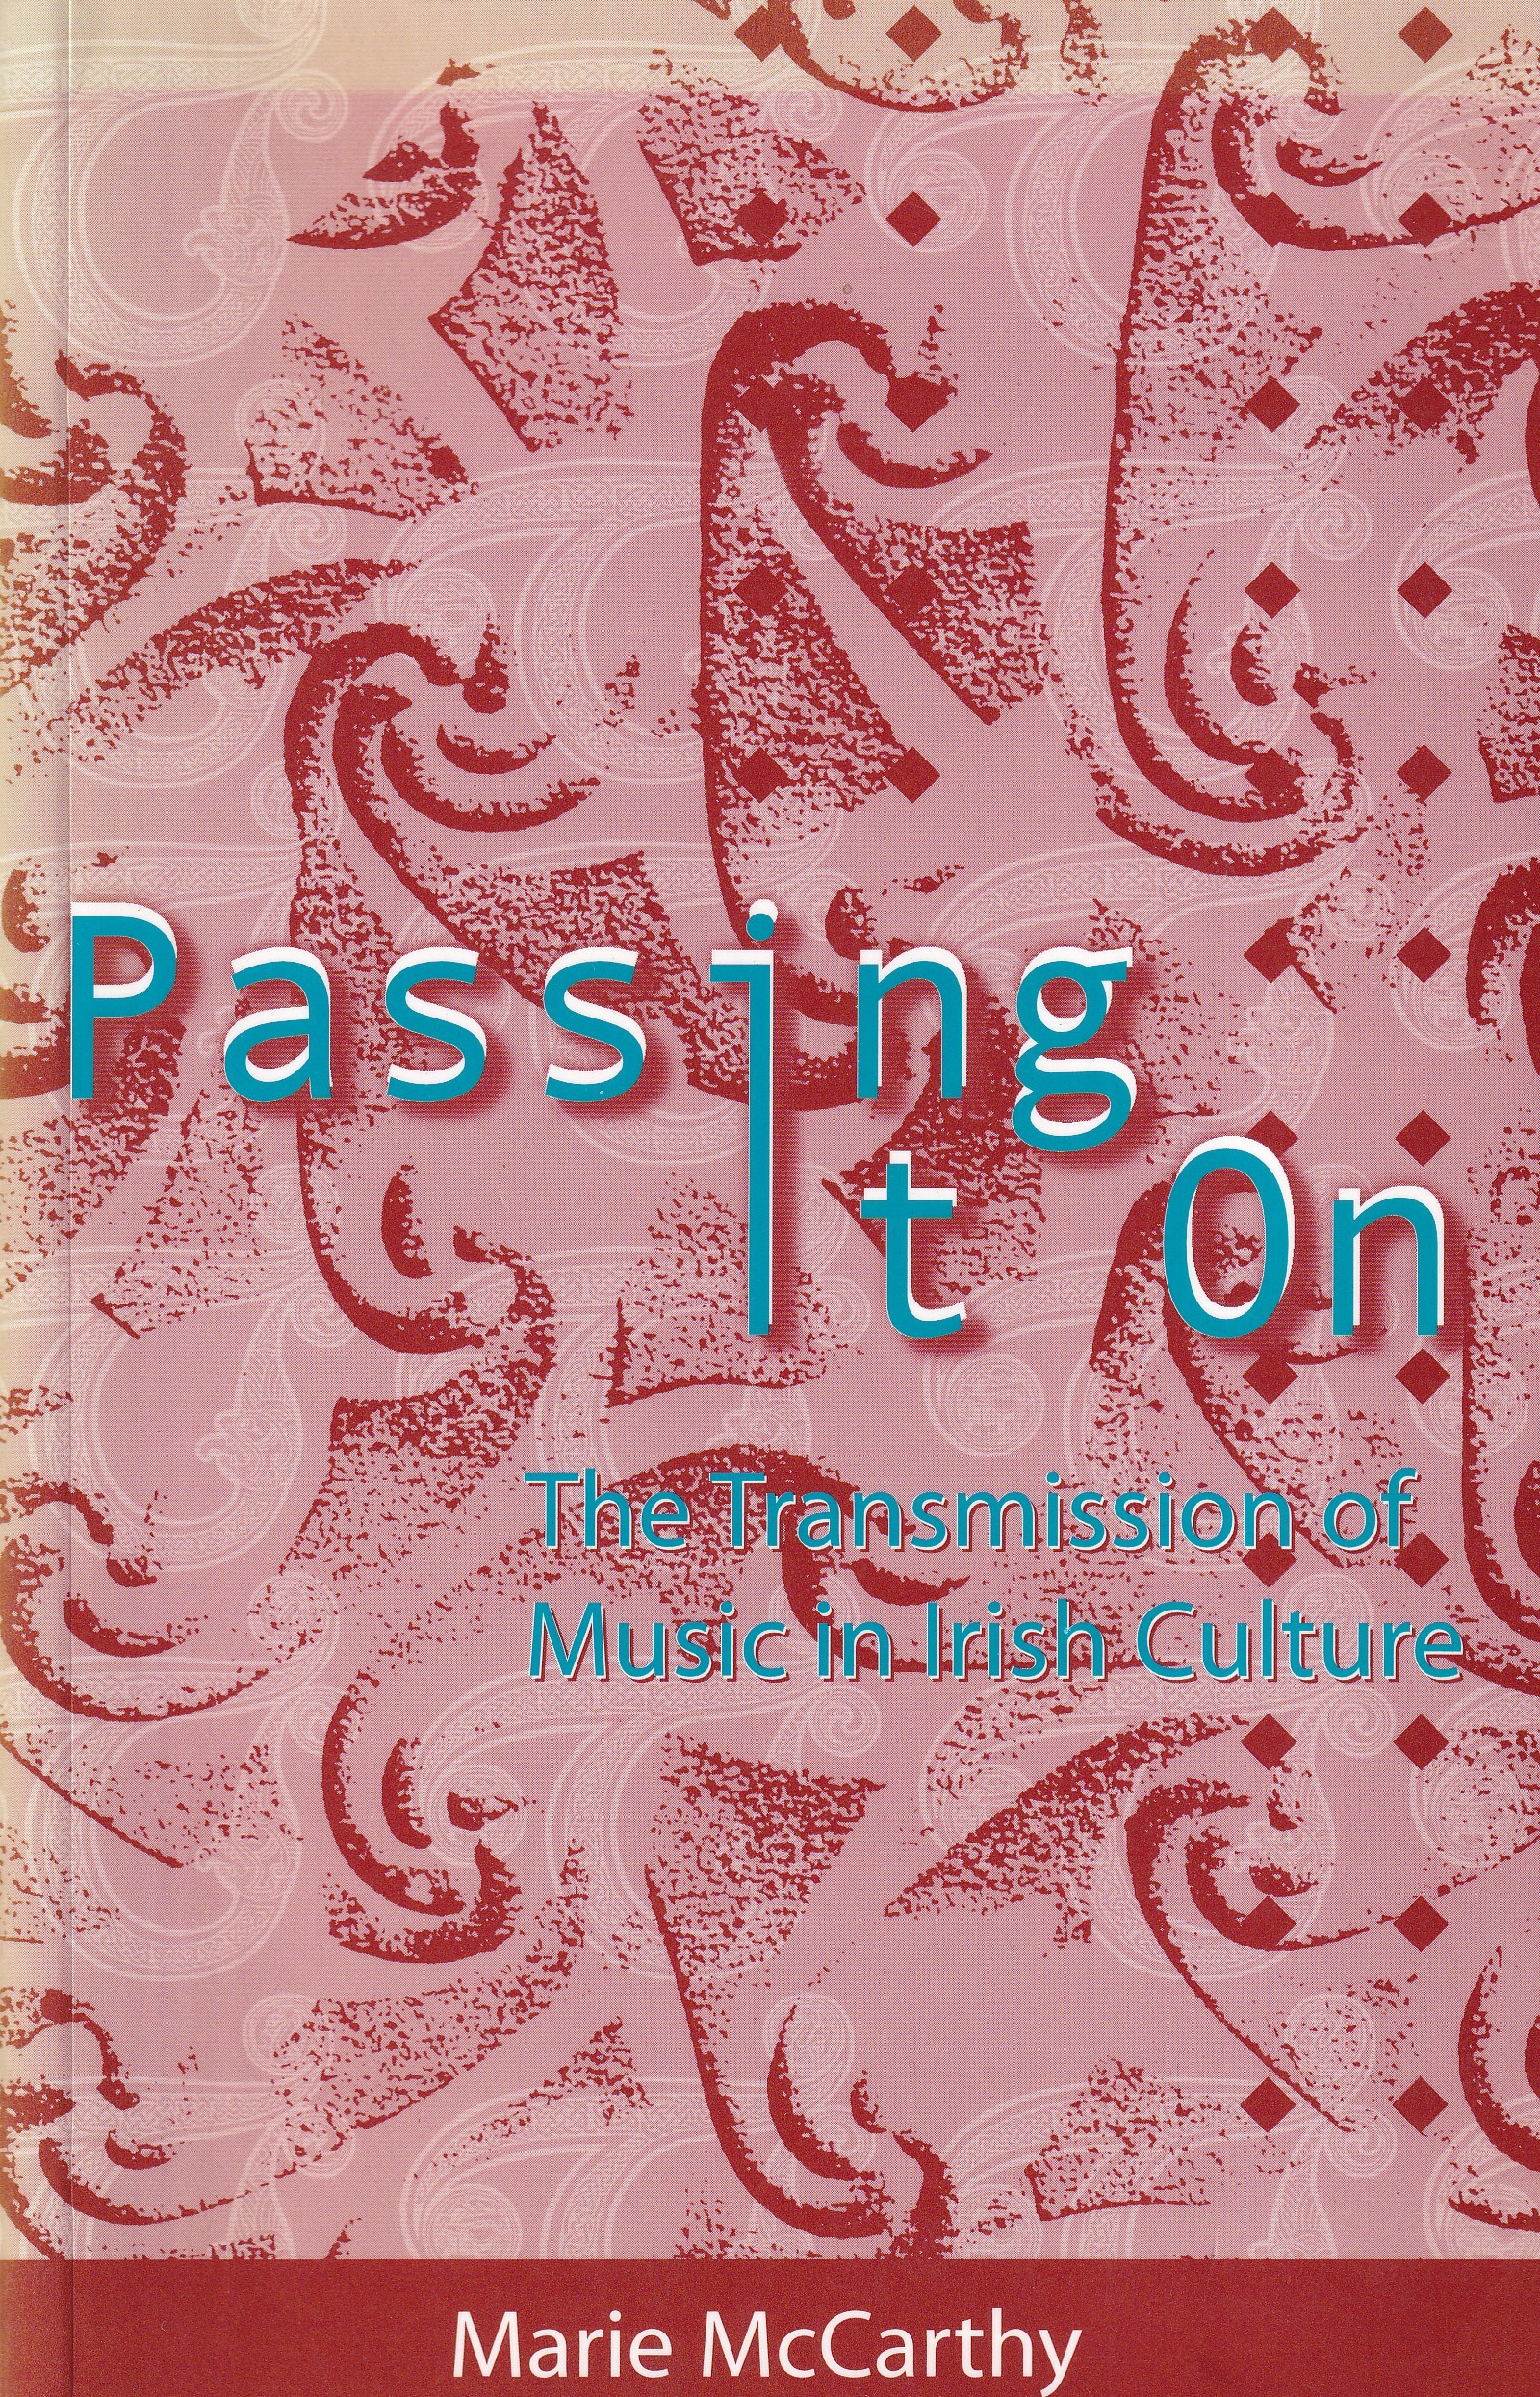 Passing it On: The Transmission of Music in Irish Culture by Marie McCarthy